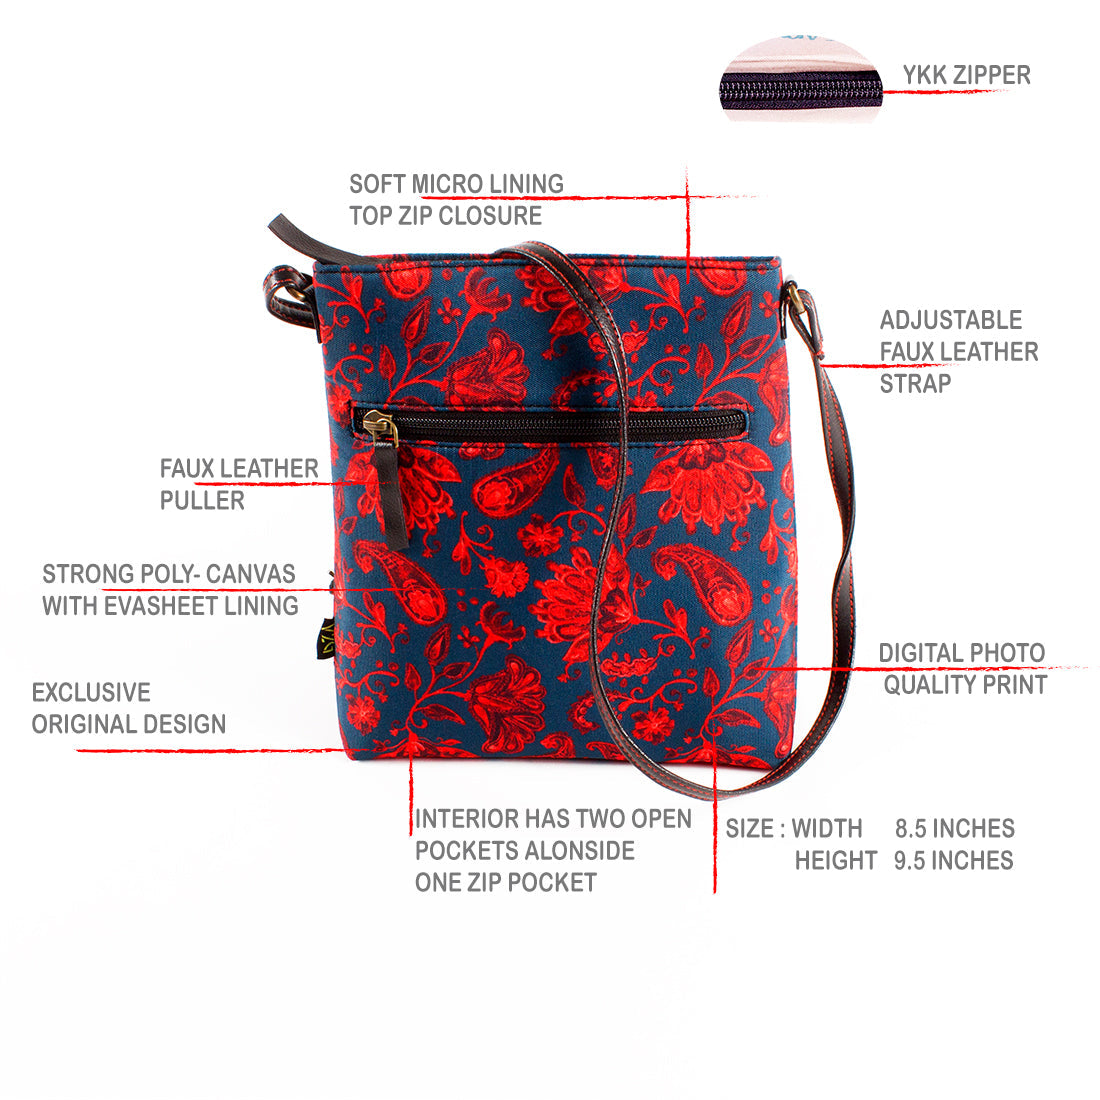 Sling Bag - Red Floral Paisely